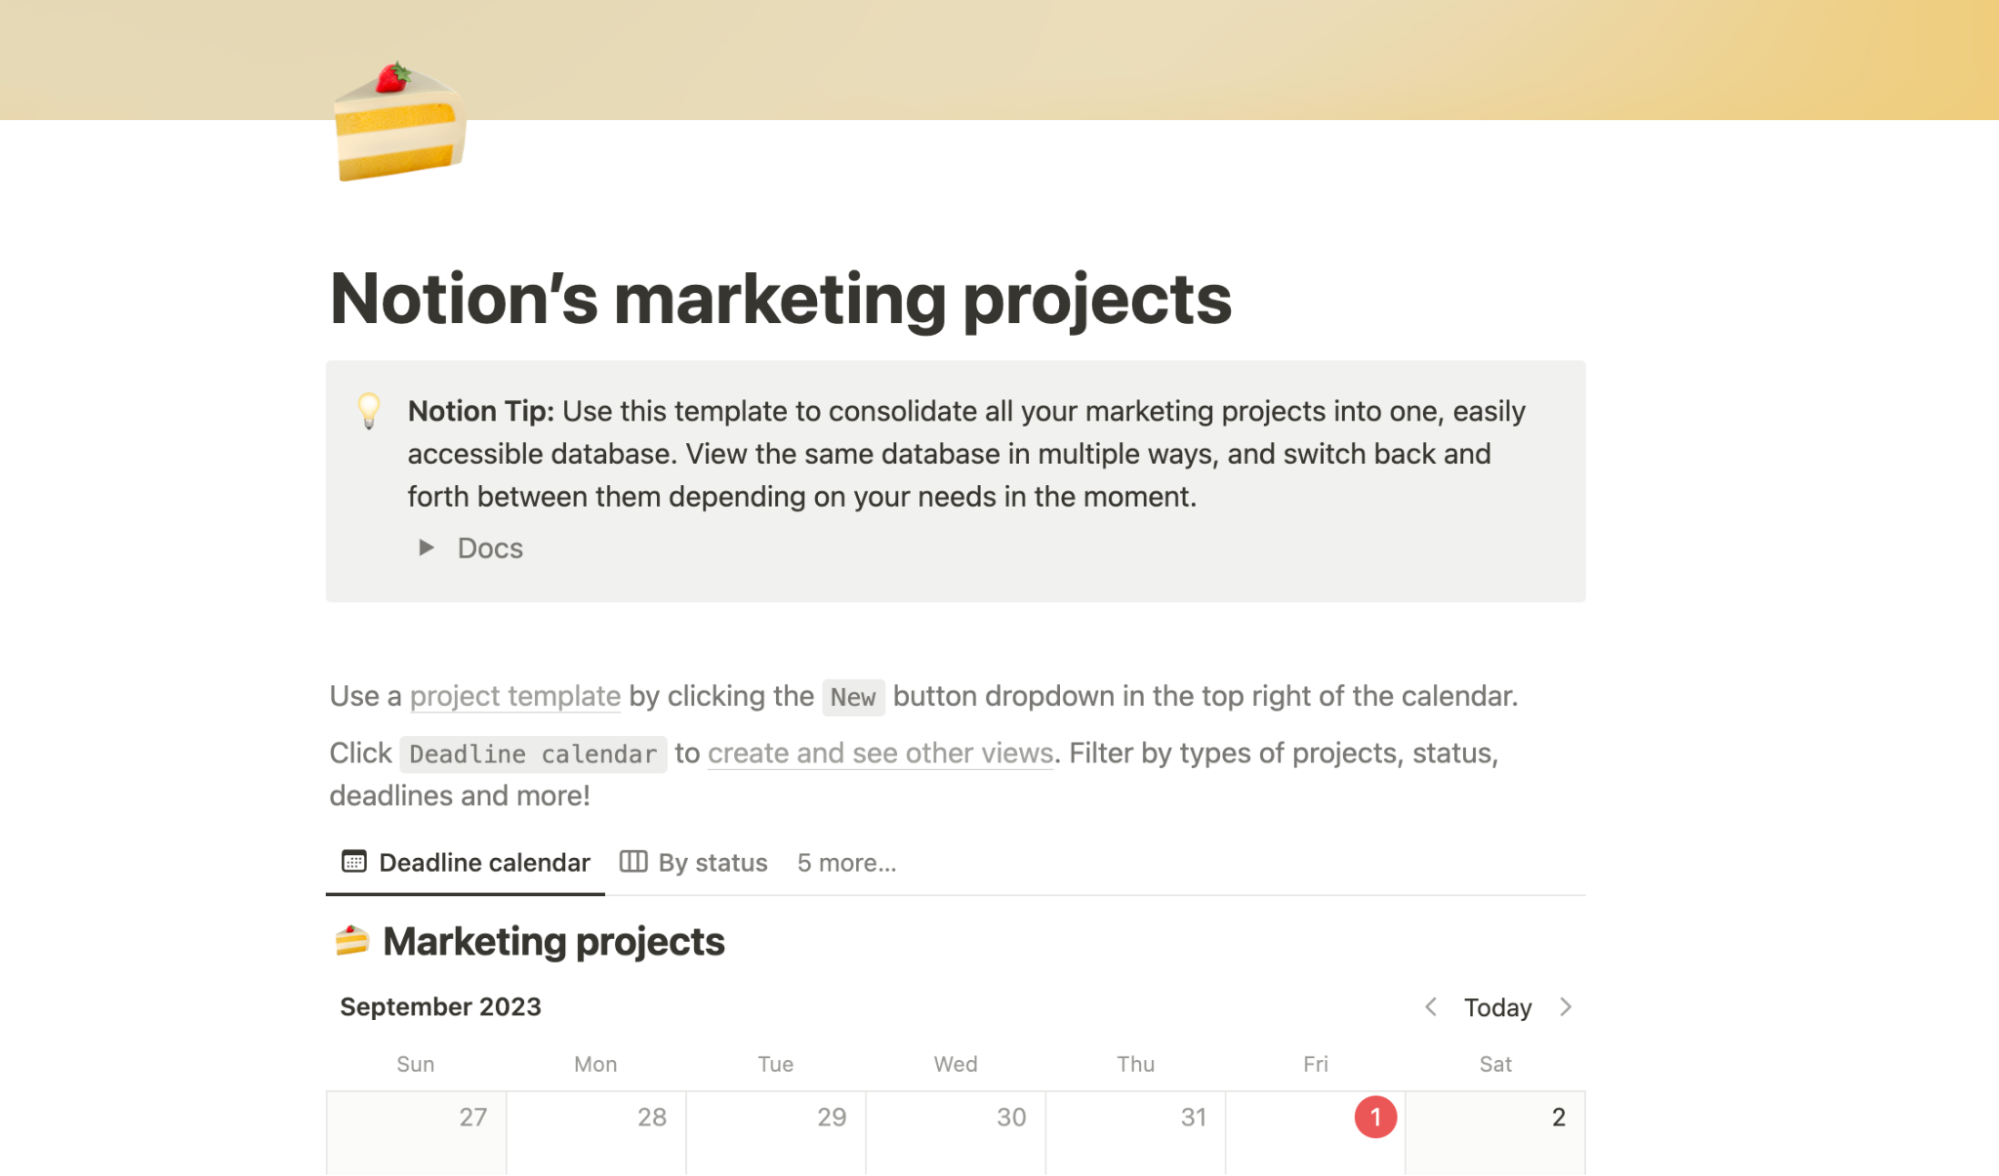 Notion's marketing projects